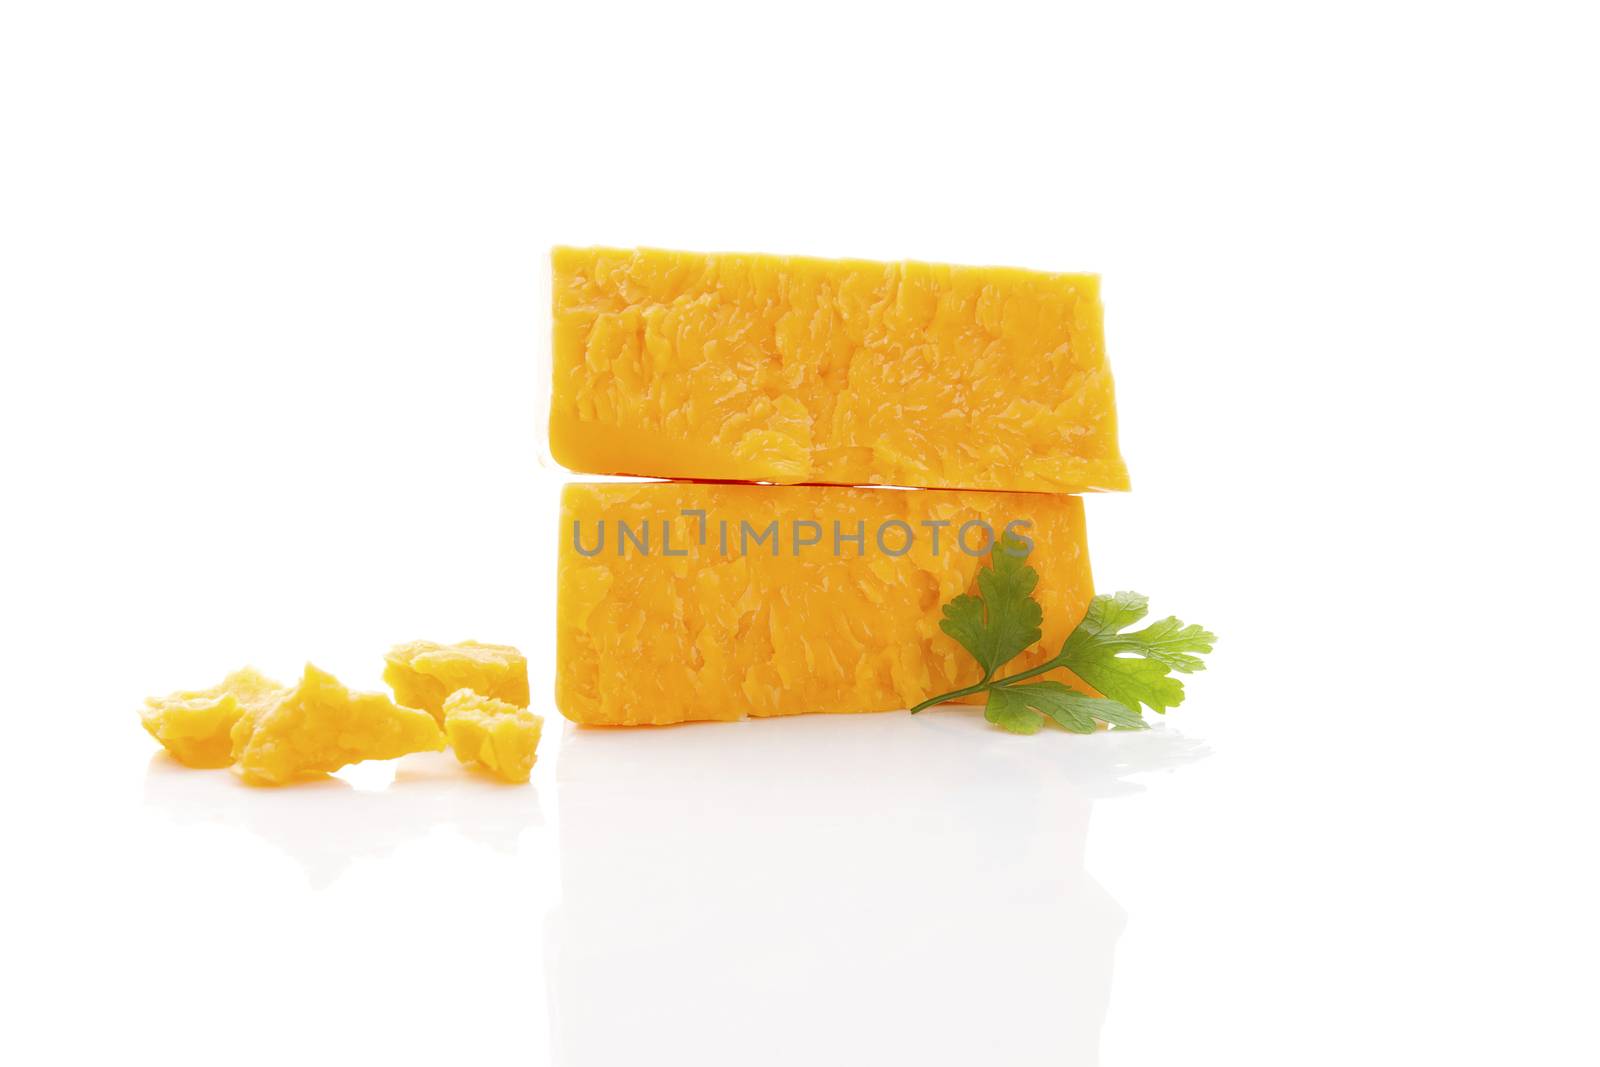 Delicious cheddar cheese. by eskymaks